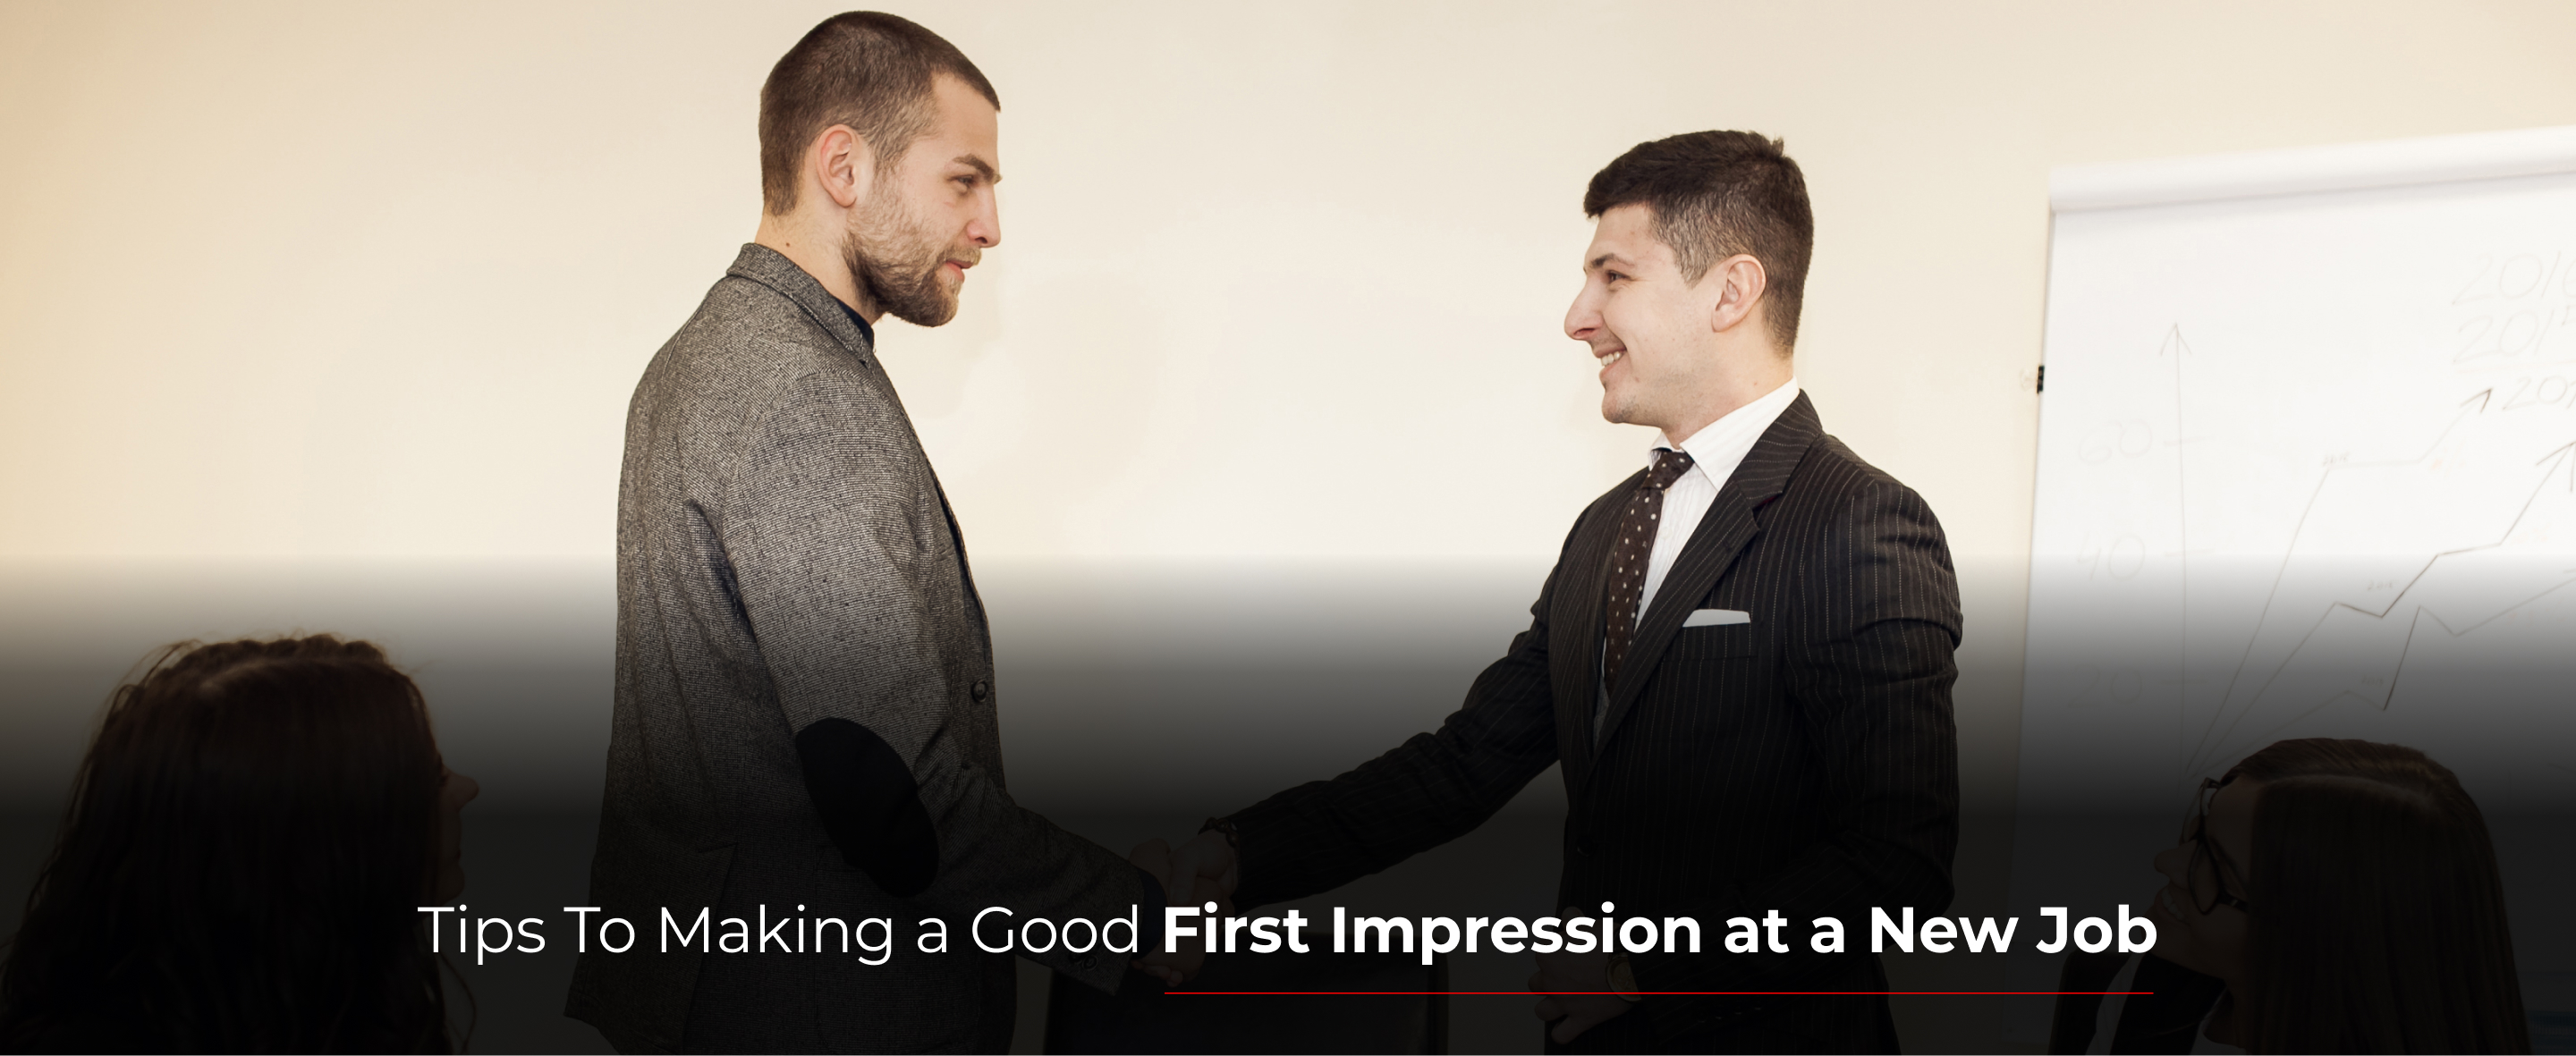 Tips To Making a Good First Impression at a New Job